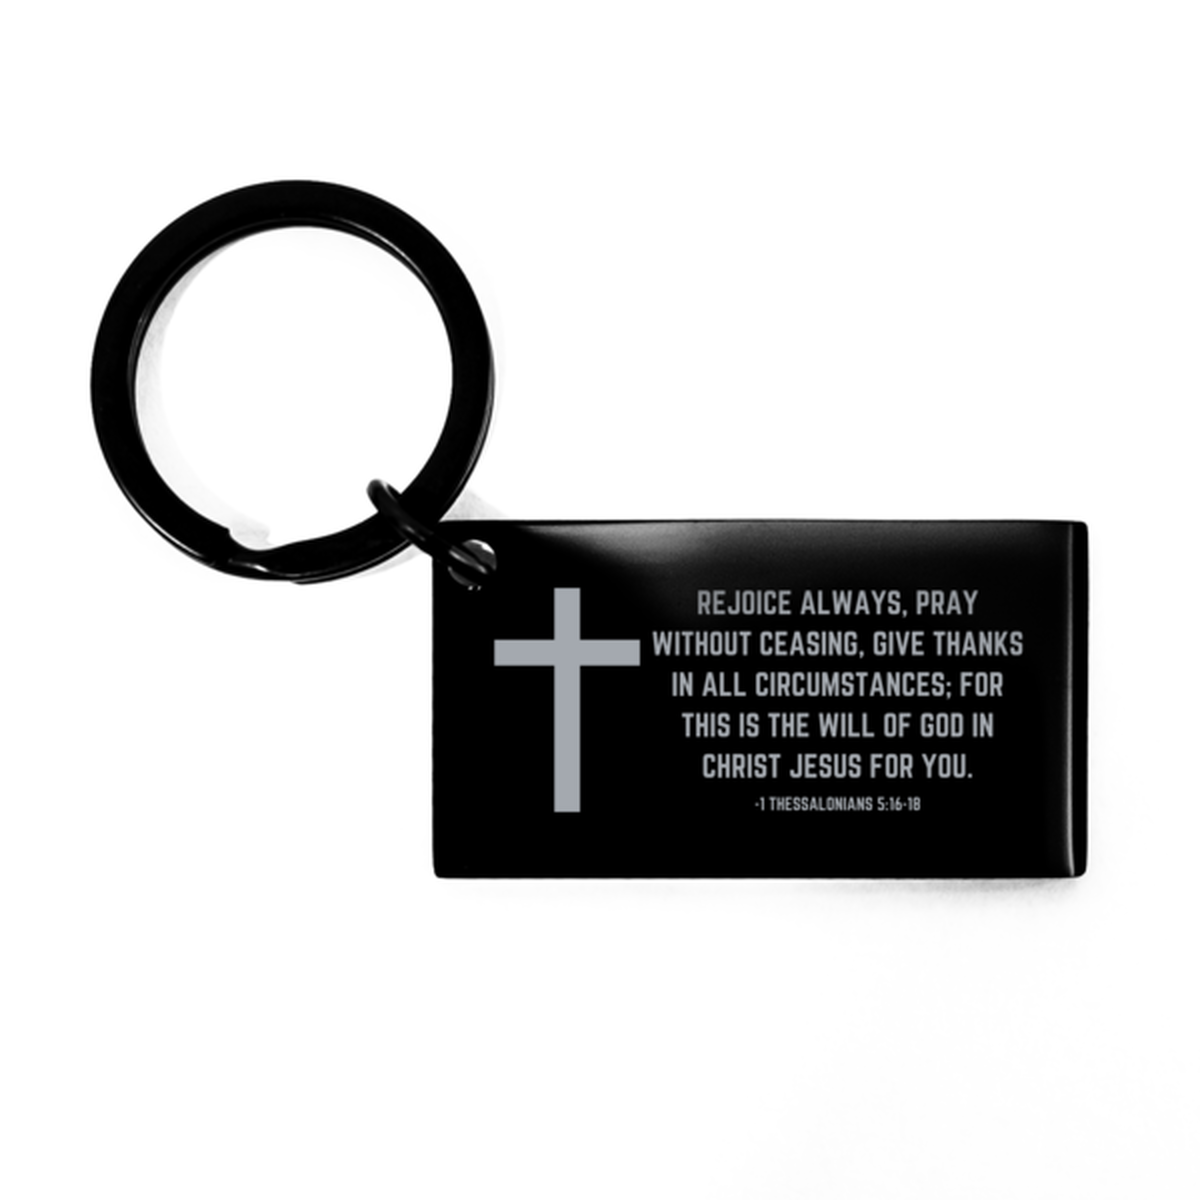 Baptism Gifts For Teenage Boys Girls, Christian Bible Verse Black Keychain, Rejoice always, pray without ceasing, Confirmation Gifts, Bible Verse Keyring for Son, Godson, Grandson, Nephew